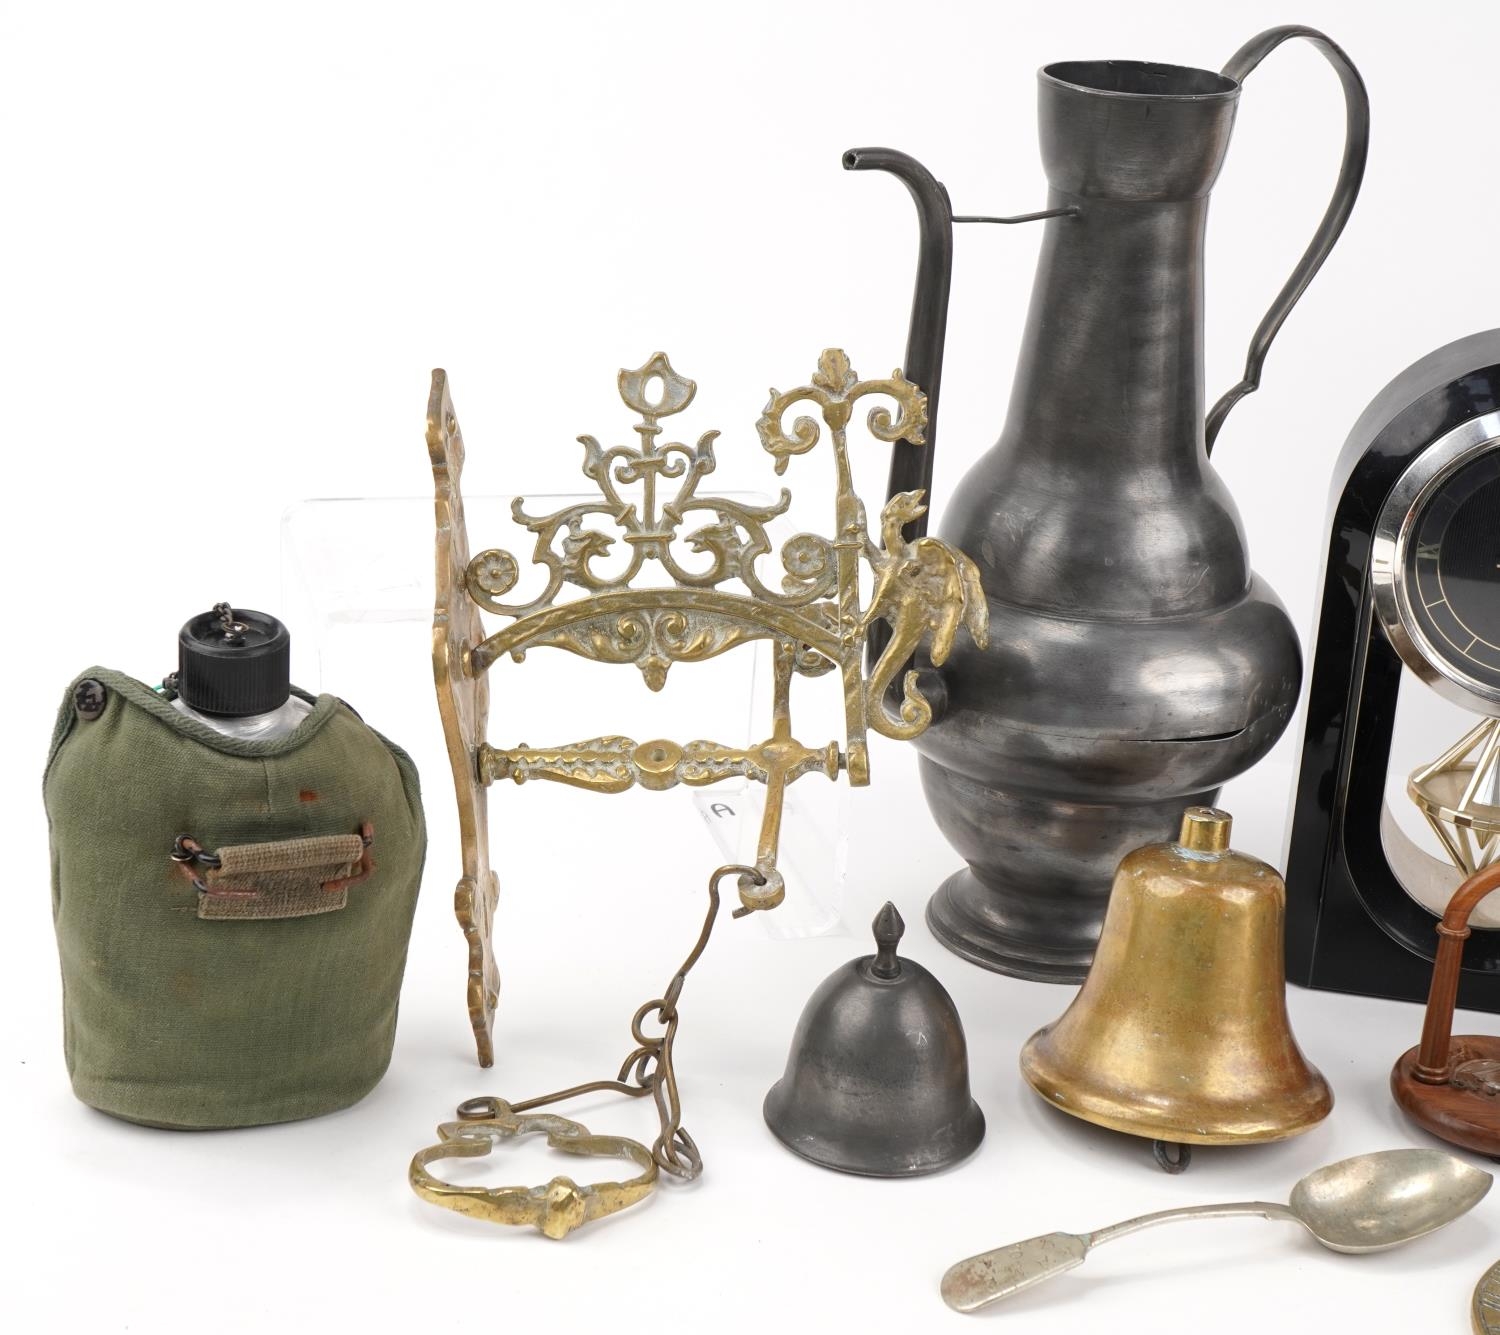 Antique and later sundry items including Voigtlander camera, sundial and bronze bell : For further - Image 3 of 3